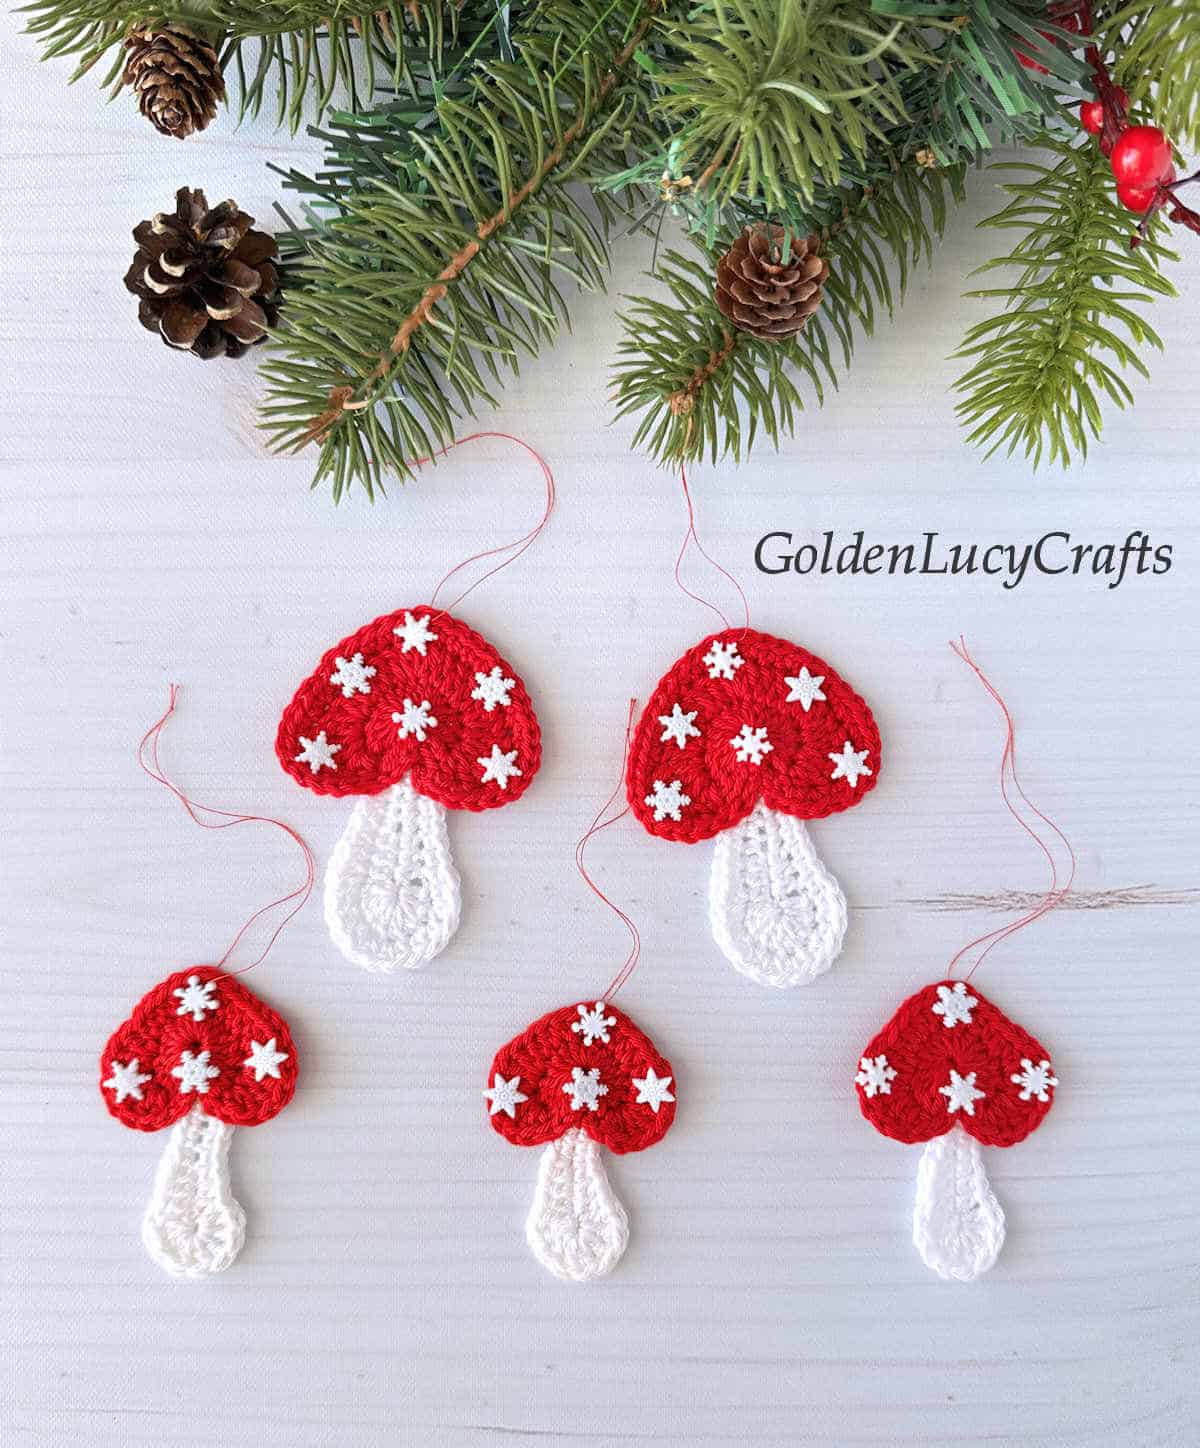 Crocheted mushrooms with heart-shaped caps Christmas ornaments.